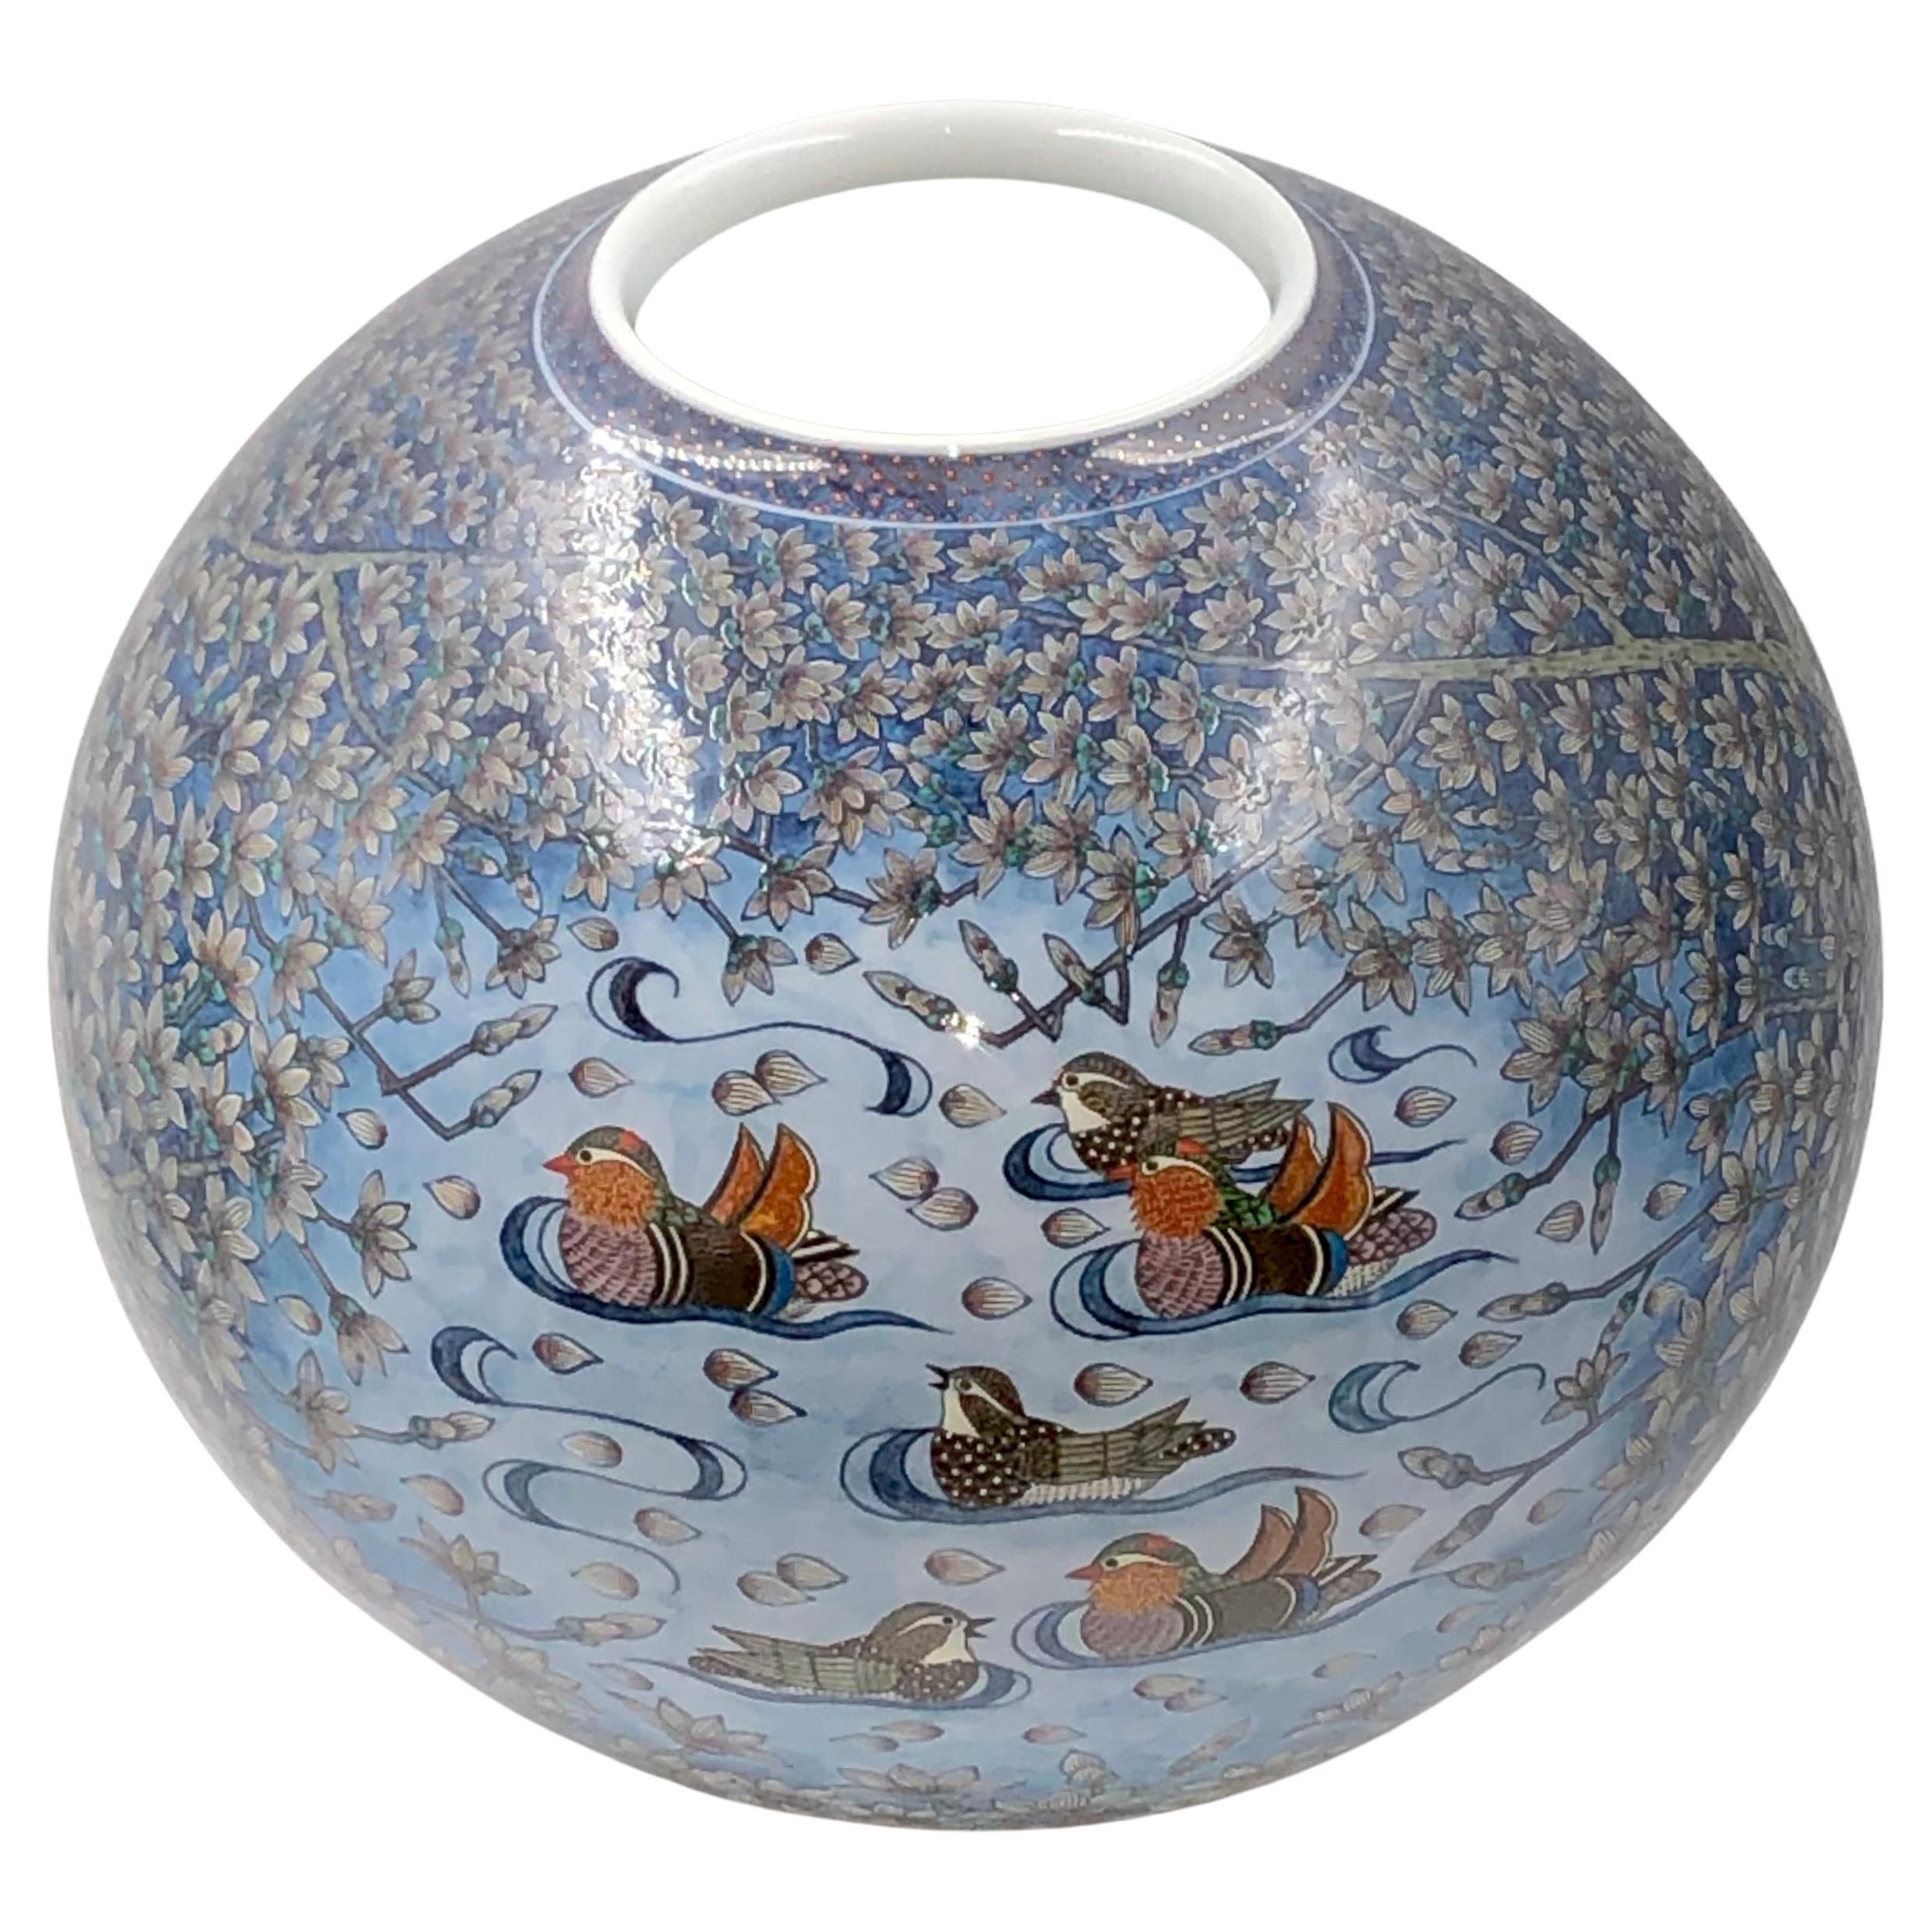 Extraordinary Japanese museum quality contemporary decorative porcelain vase, painstakingly intricately hand painted in stunning hues of blue on a beautifully shaped body, a signed masterpiece by second-generation master porcelain artist of the